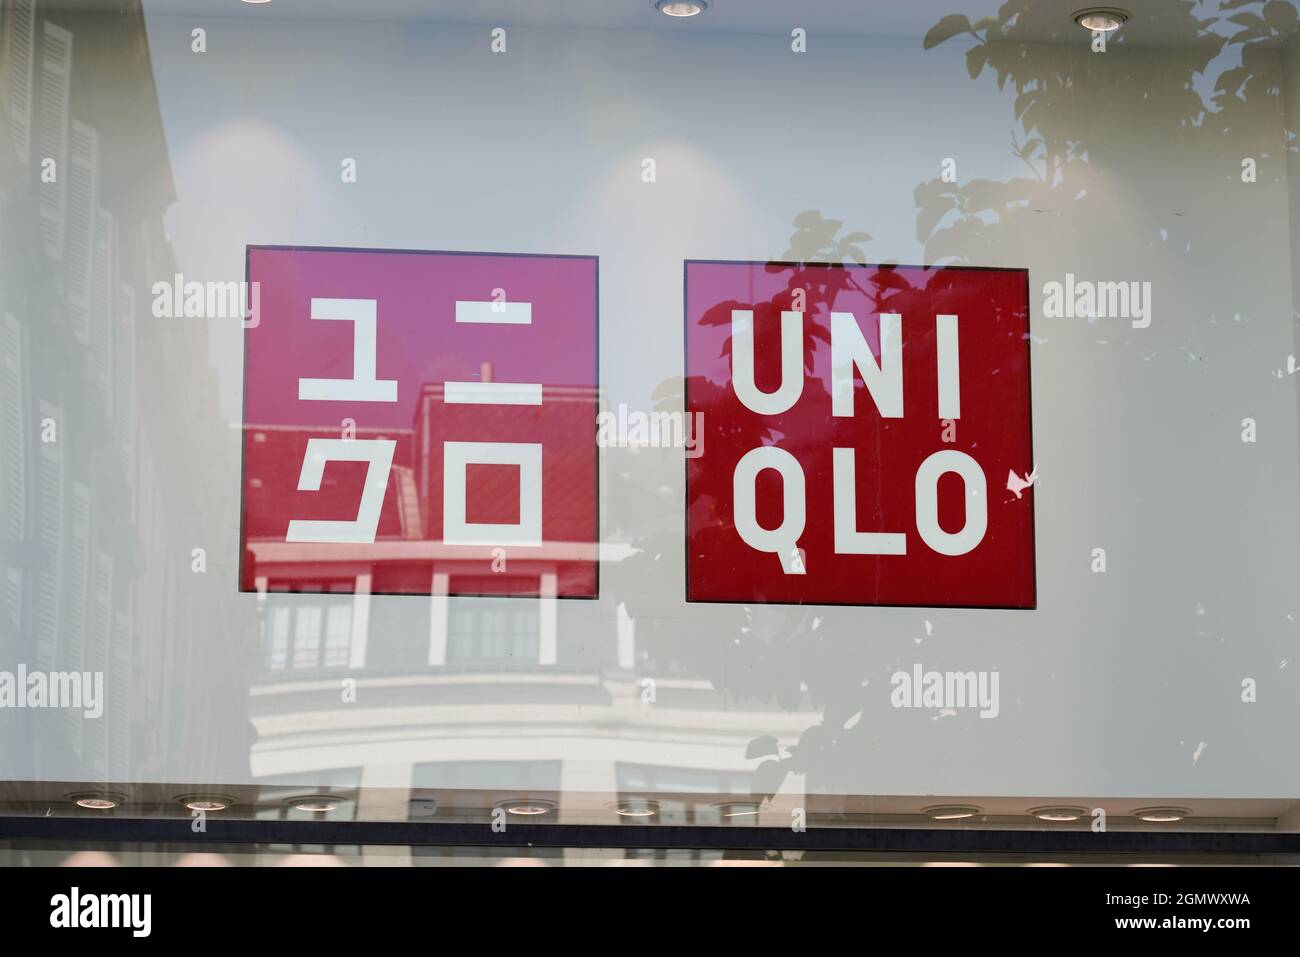 Bordeaux , Aquitaine France - 09 10 2021 : Uniqlo logo sign and brand text  store clothing fashion shop asian Japan casual wear designer Stock Photo -  Alamy